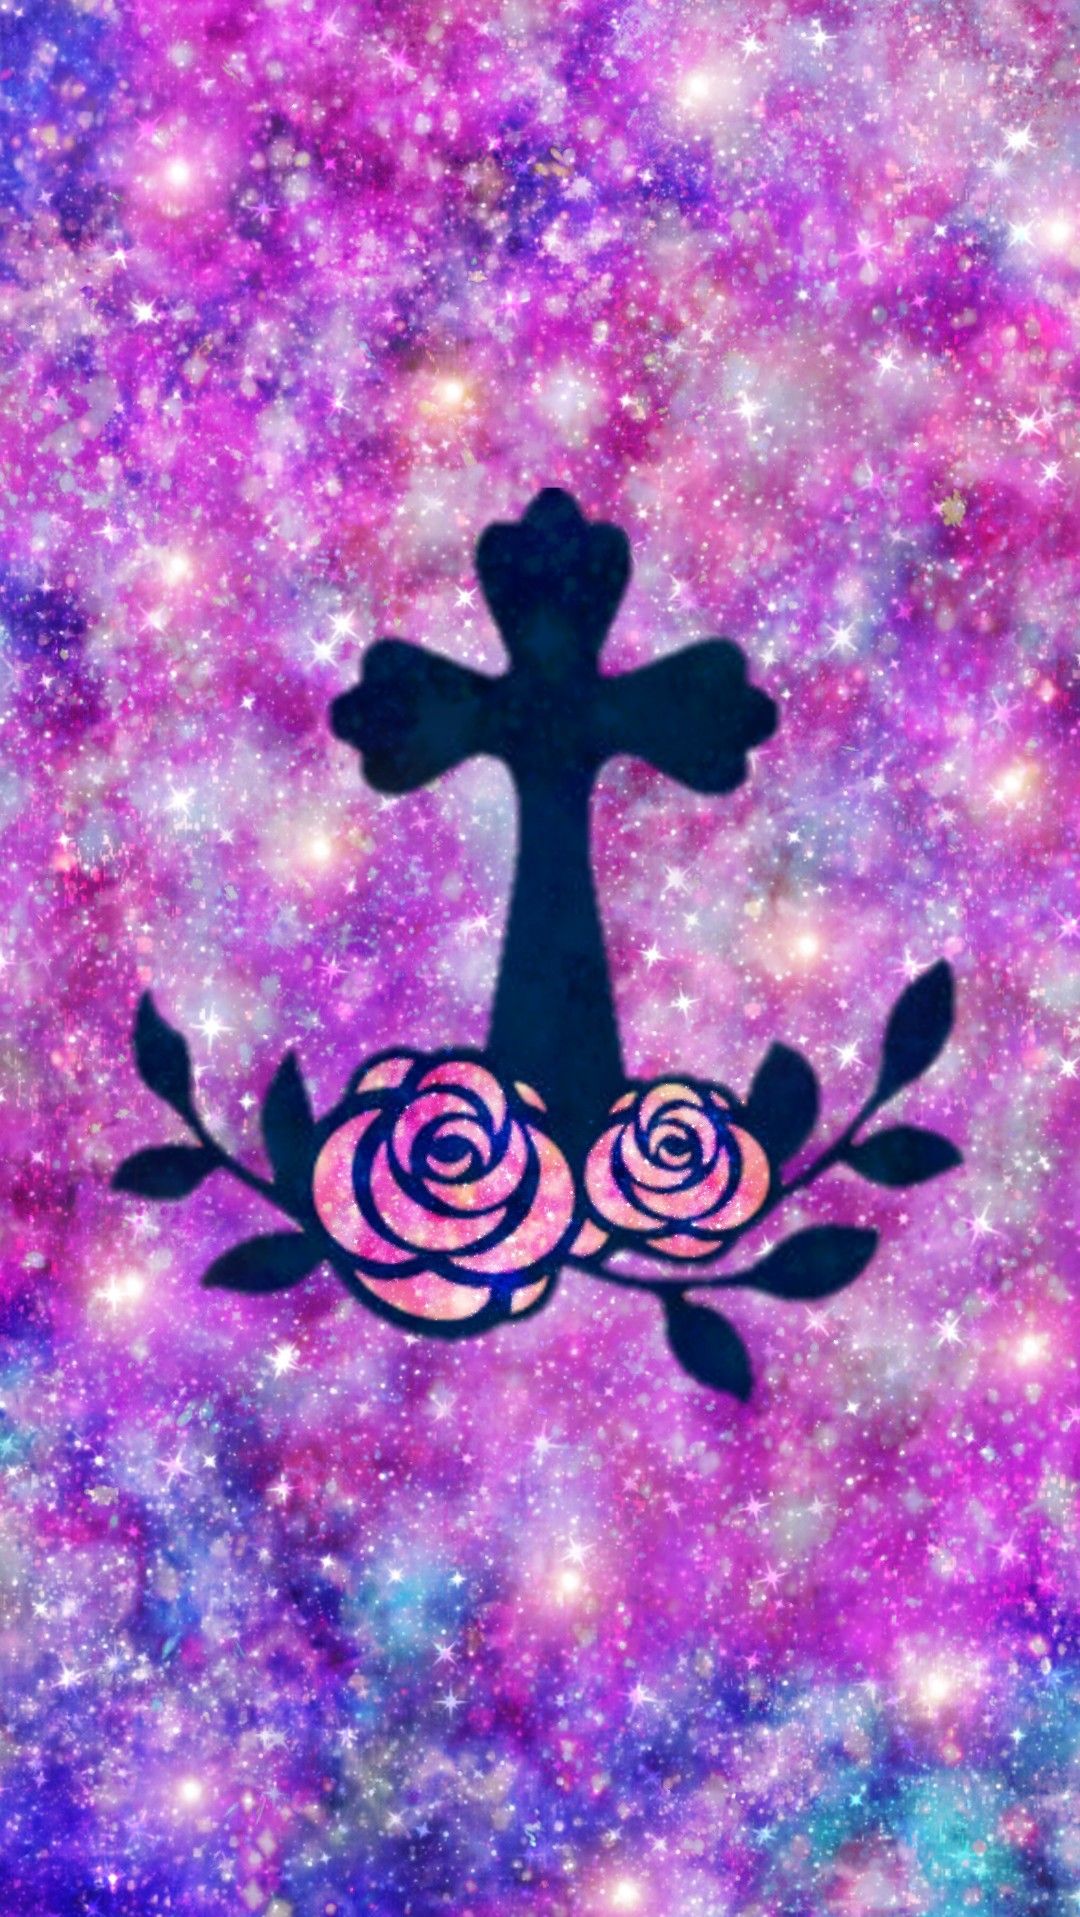 Floral Cross Galaxy Made By Me Purple Sparkly Wallpaper